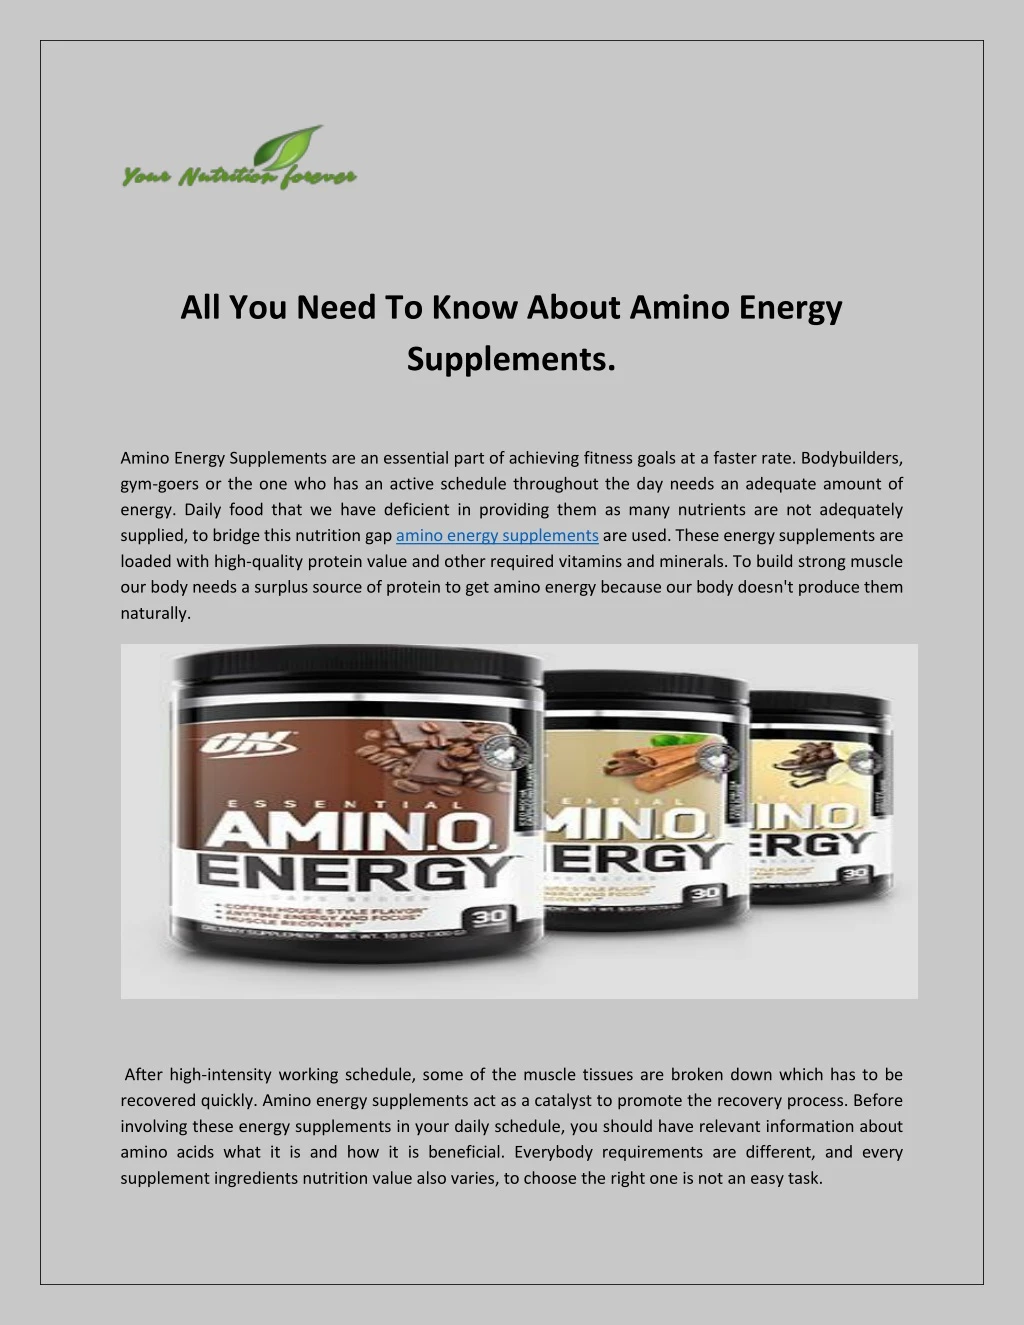 all you need to know about amino energy